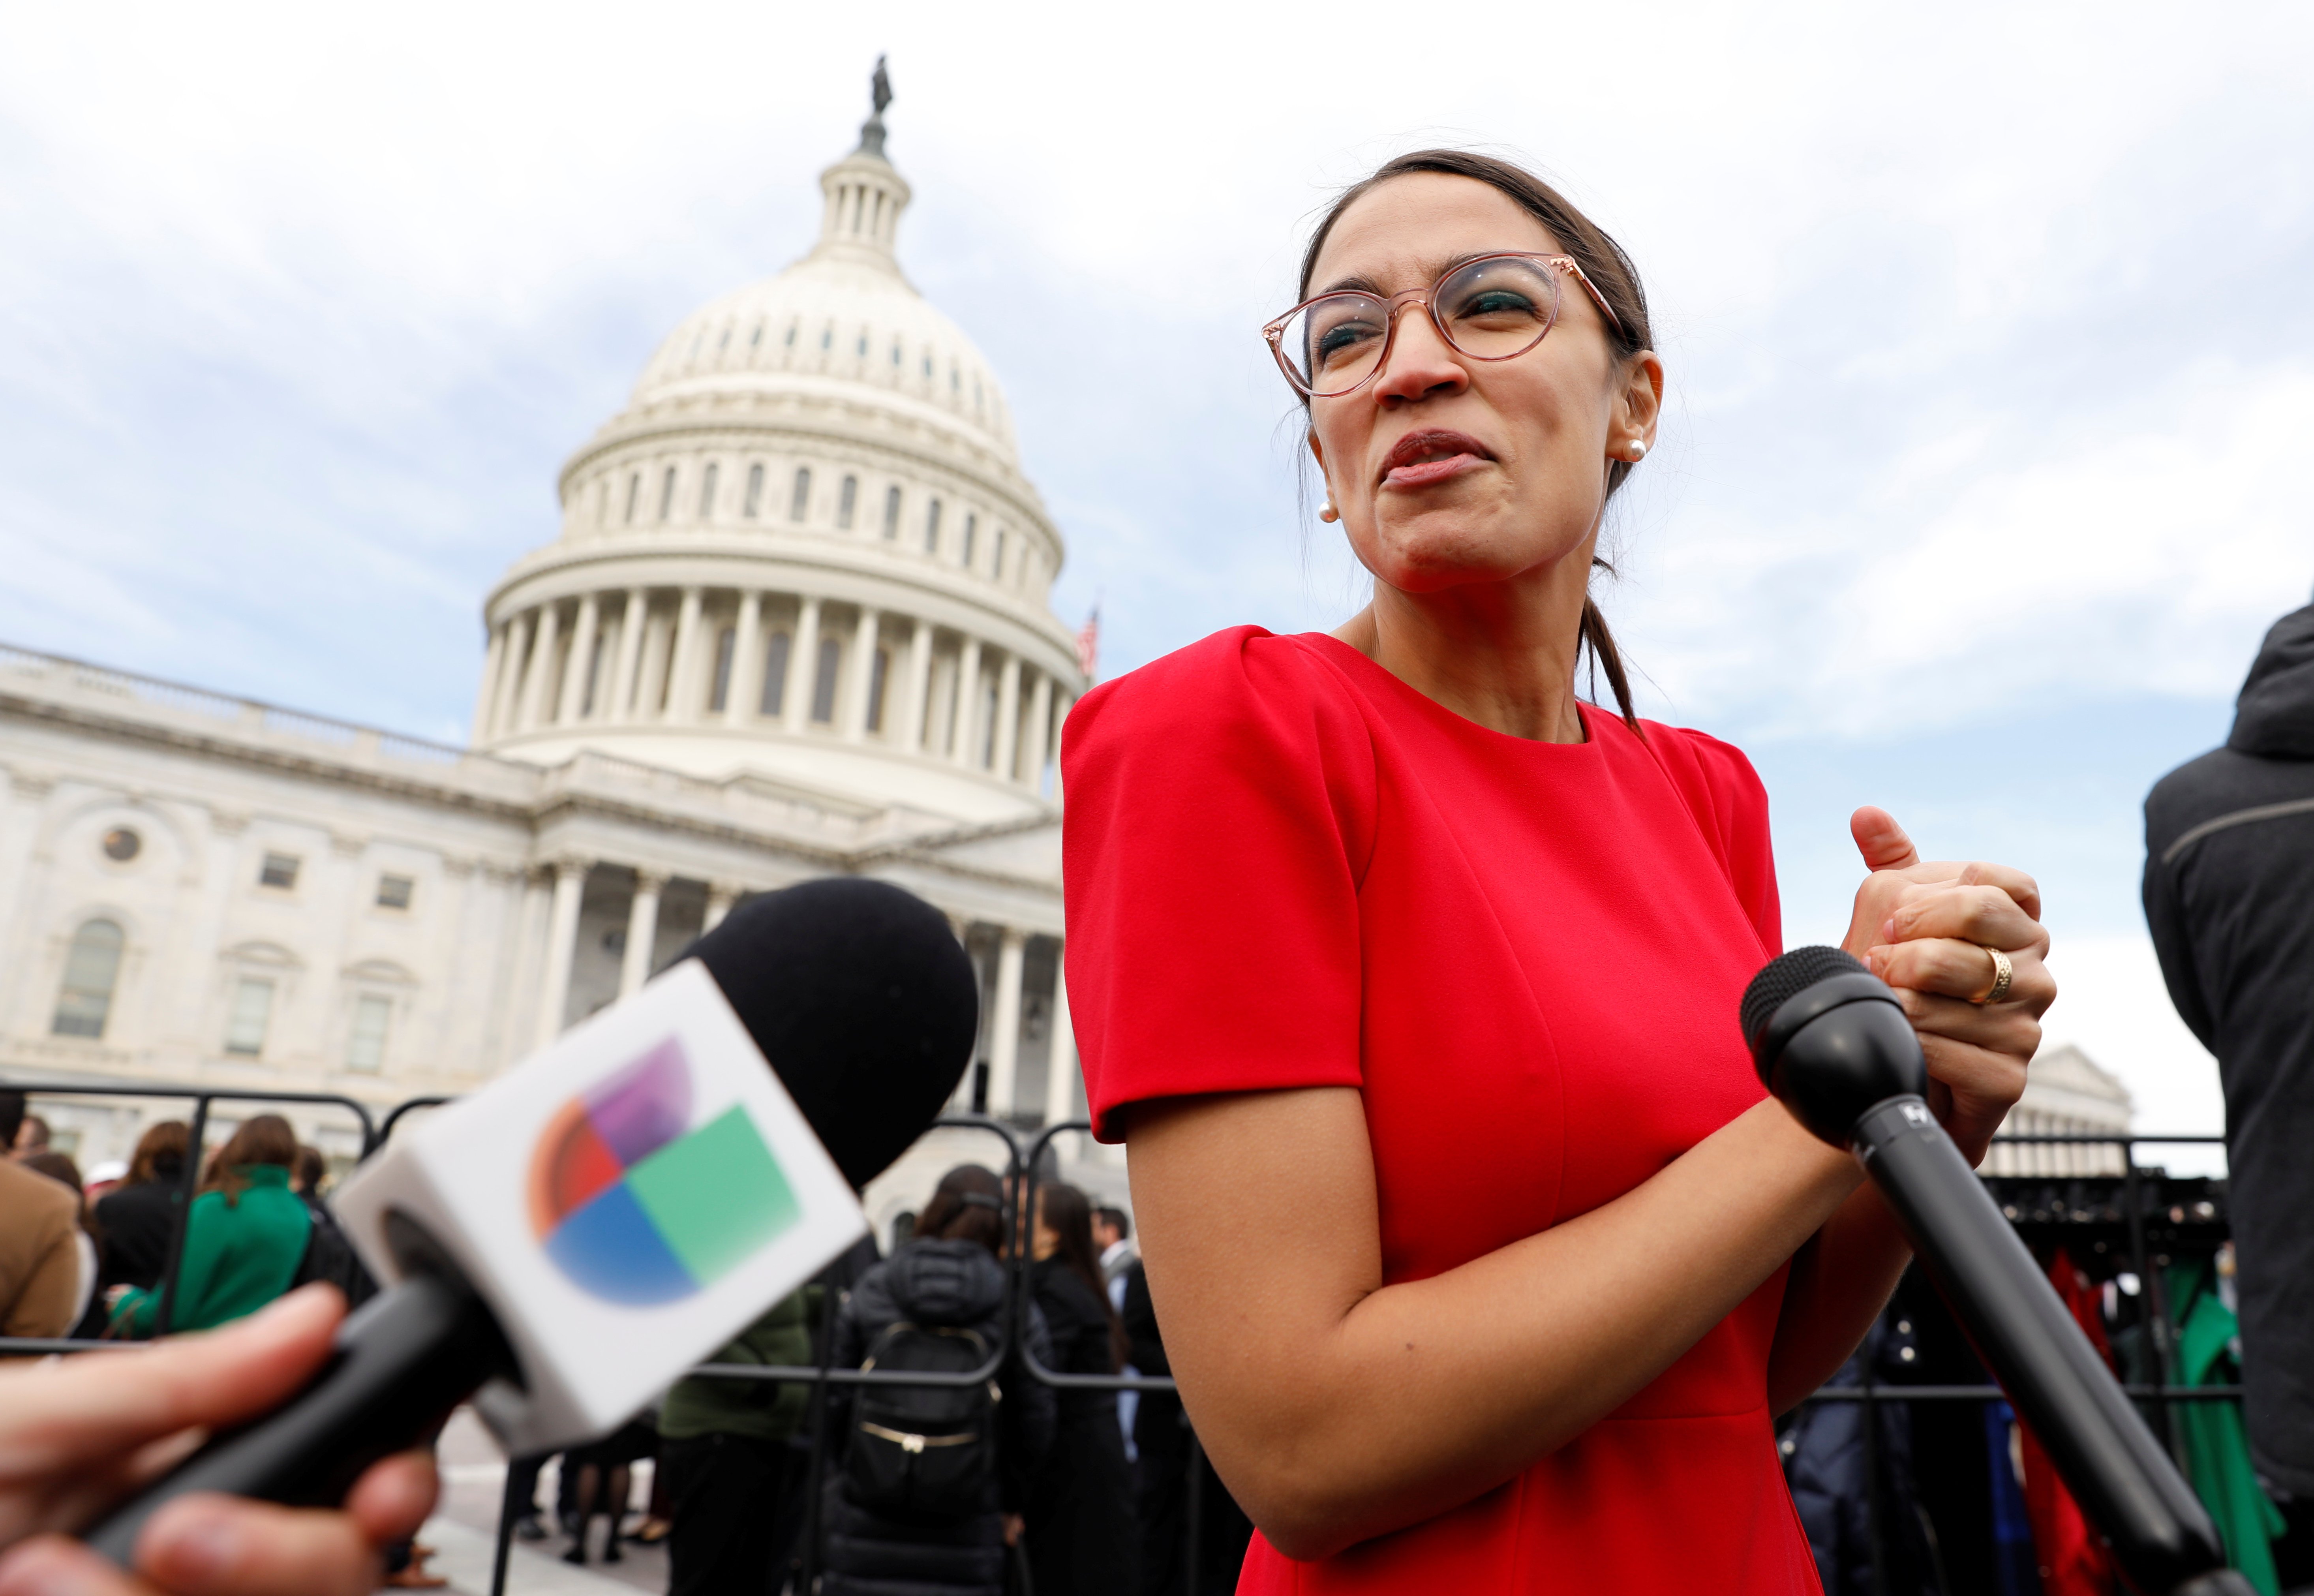 Democratic Representative-elect Alexandria Ocasio-Cortez of New York talks with reporters as she arrives for a class photo with incoming newly elected members of the U.S. House of Representatives on Capitol Hill in Washington, U.S., November 14, 2018. REUTERS/Kevin Lamarque